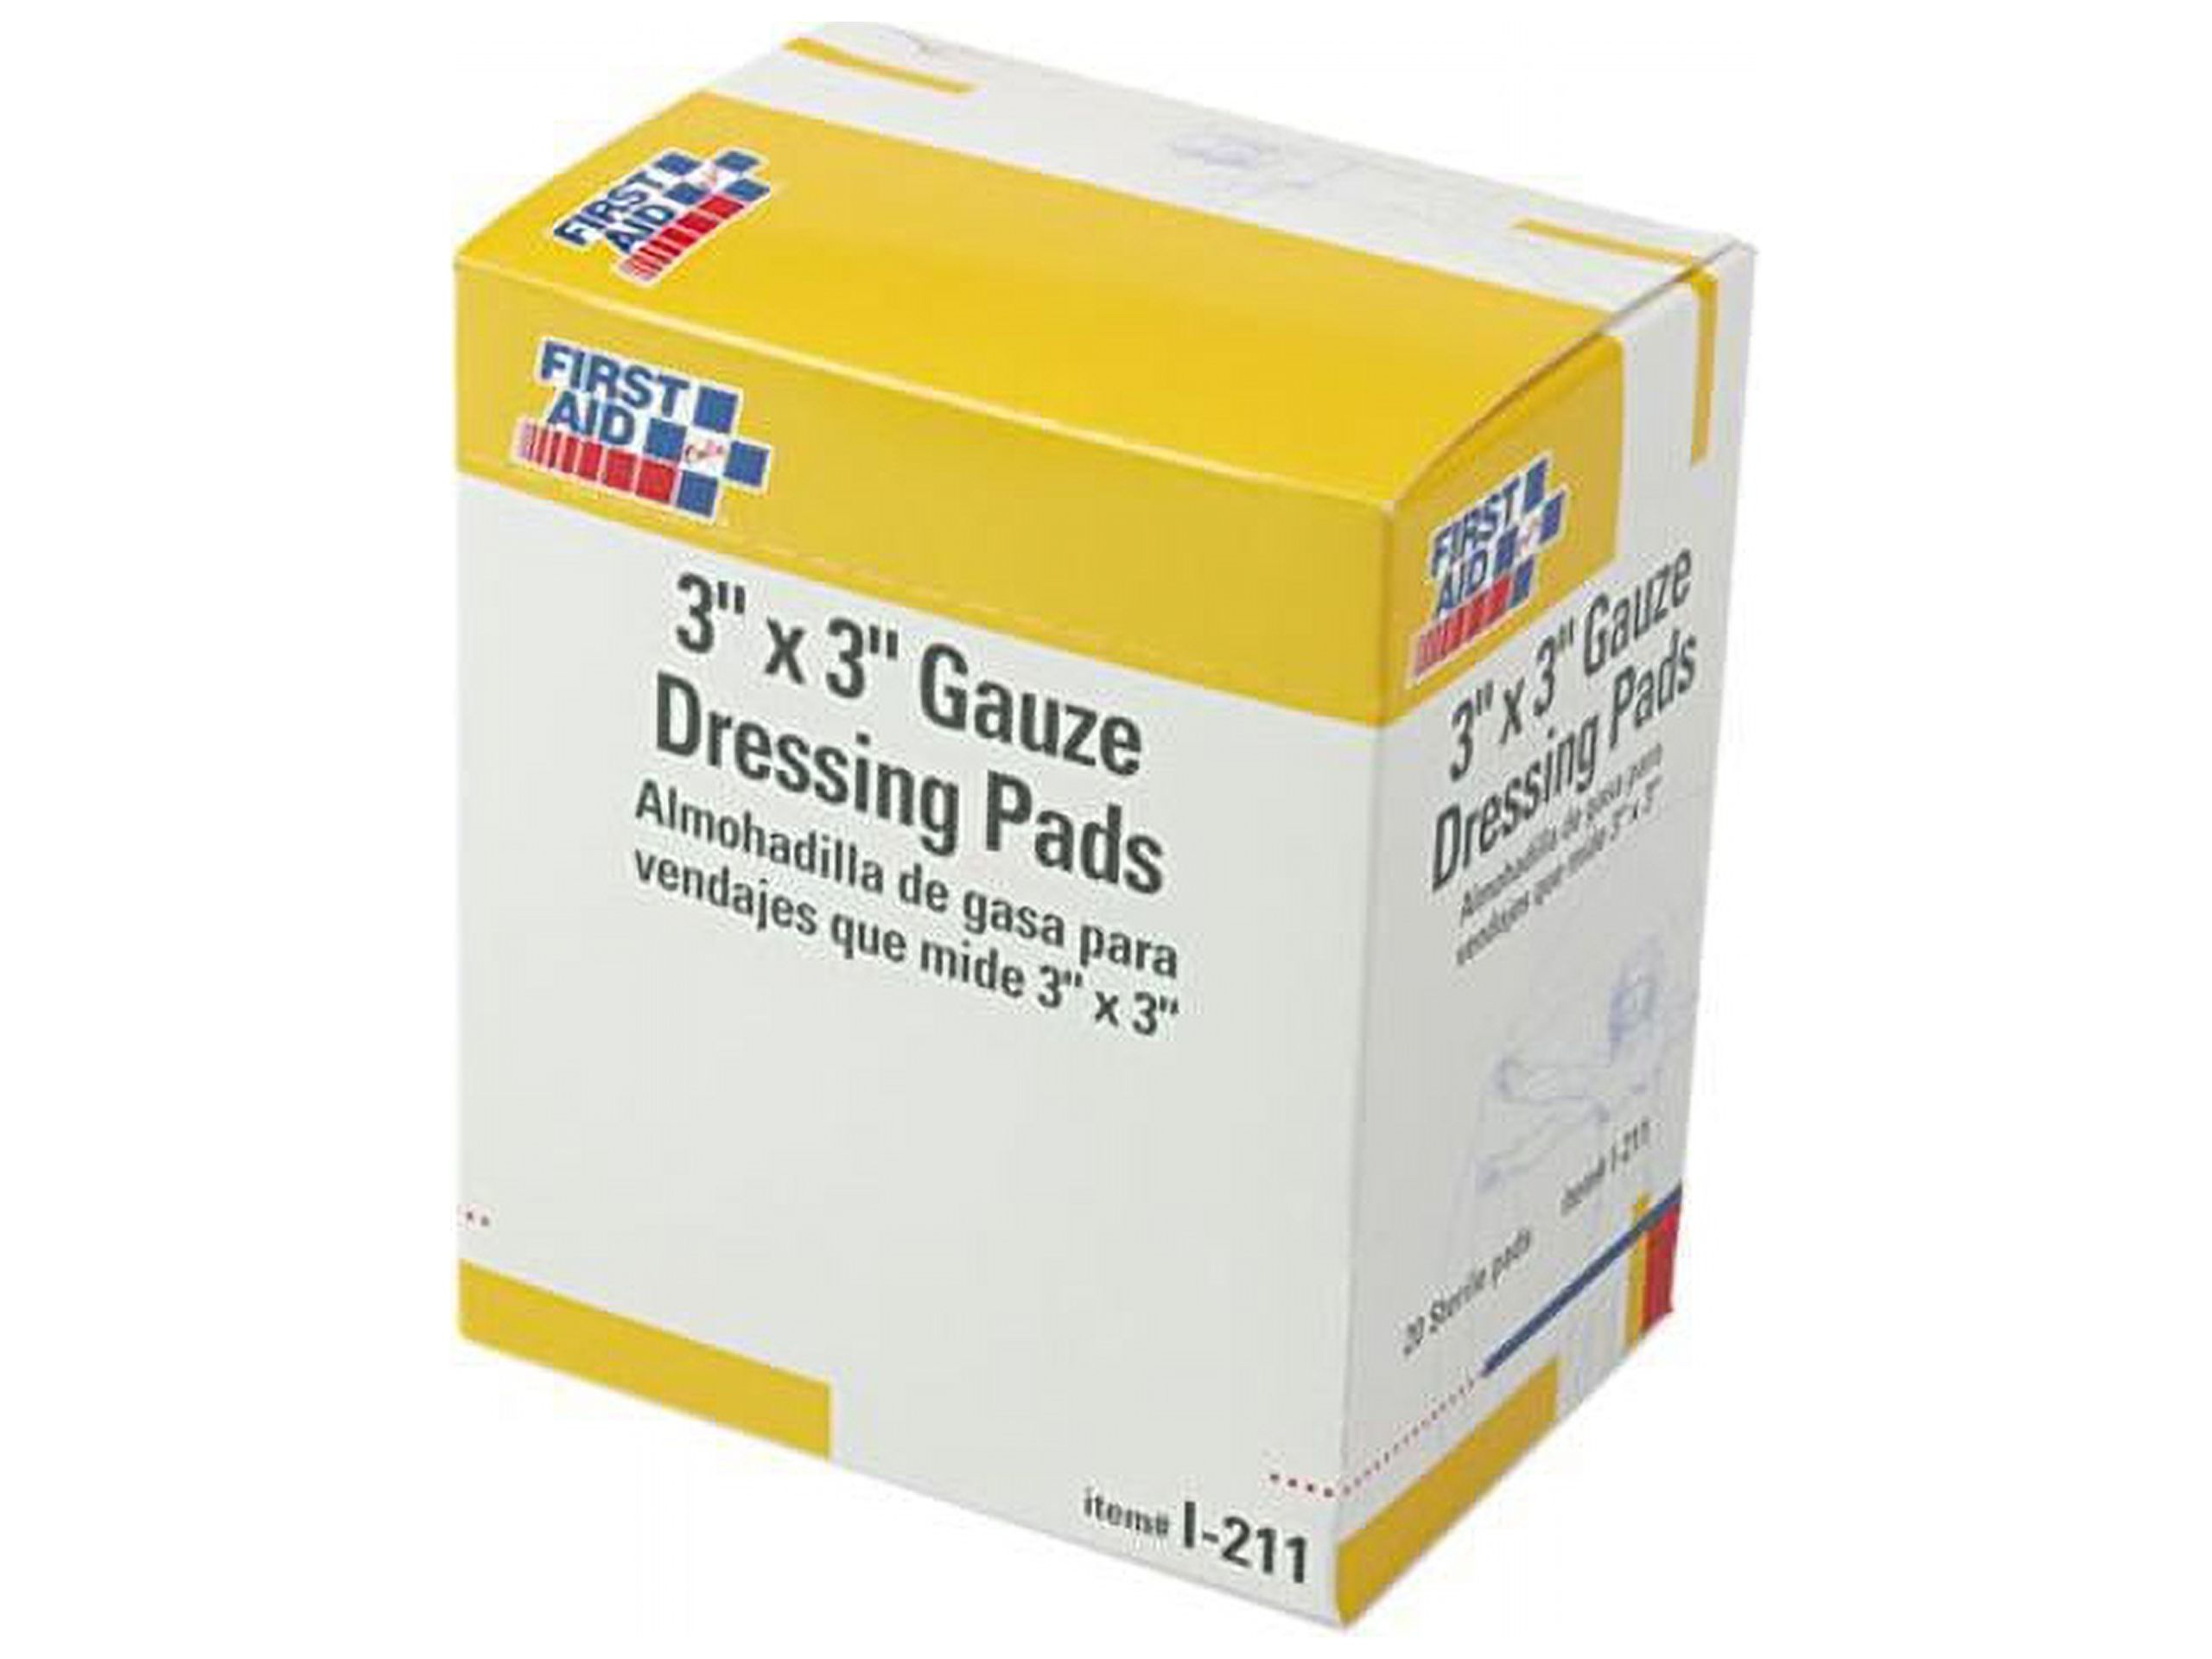 First Aid Only I-211 Gauze Dressing Pads, 3 x 3, 10/Box - image 1 of 2